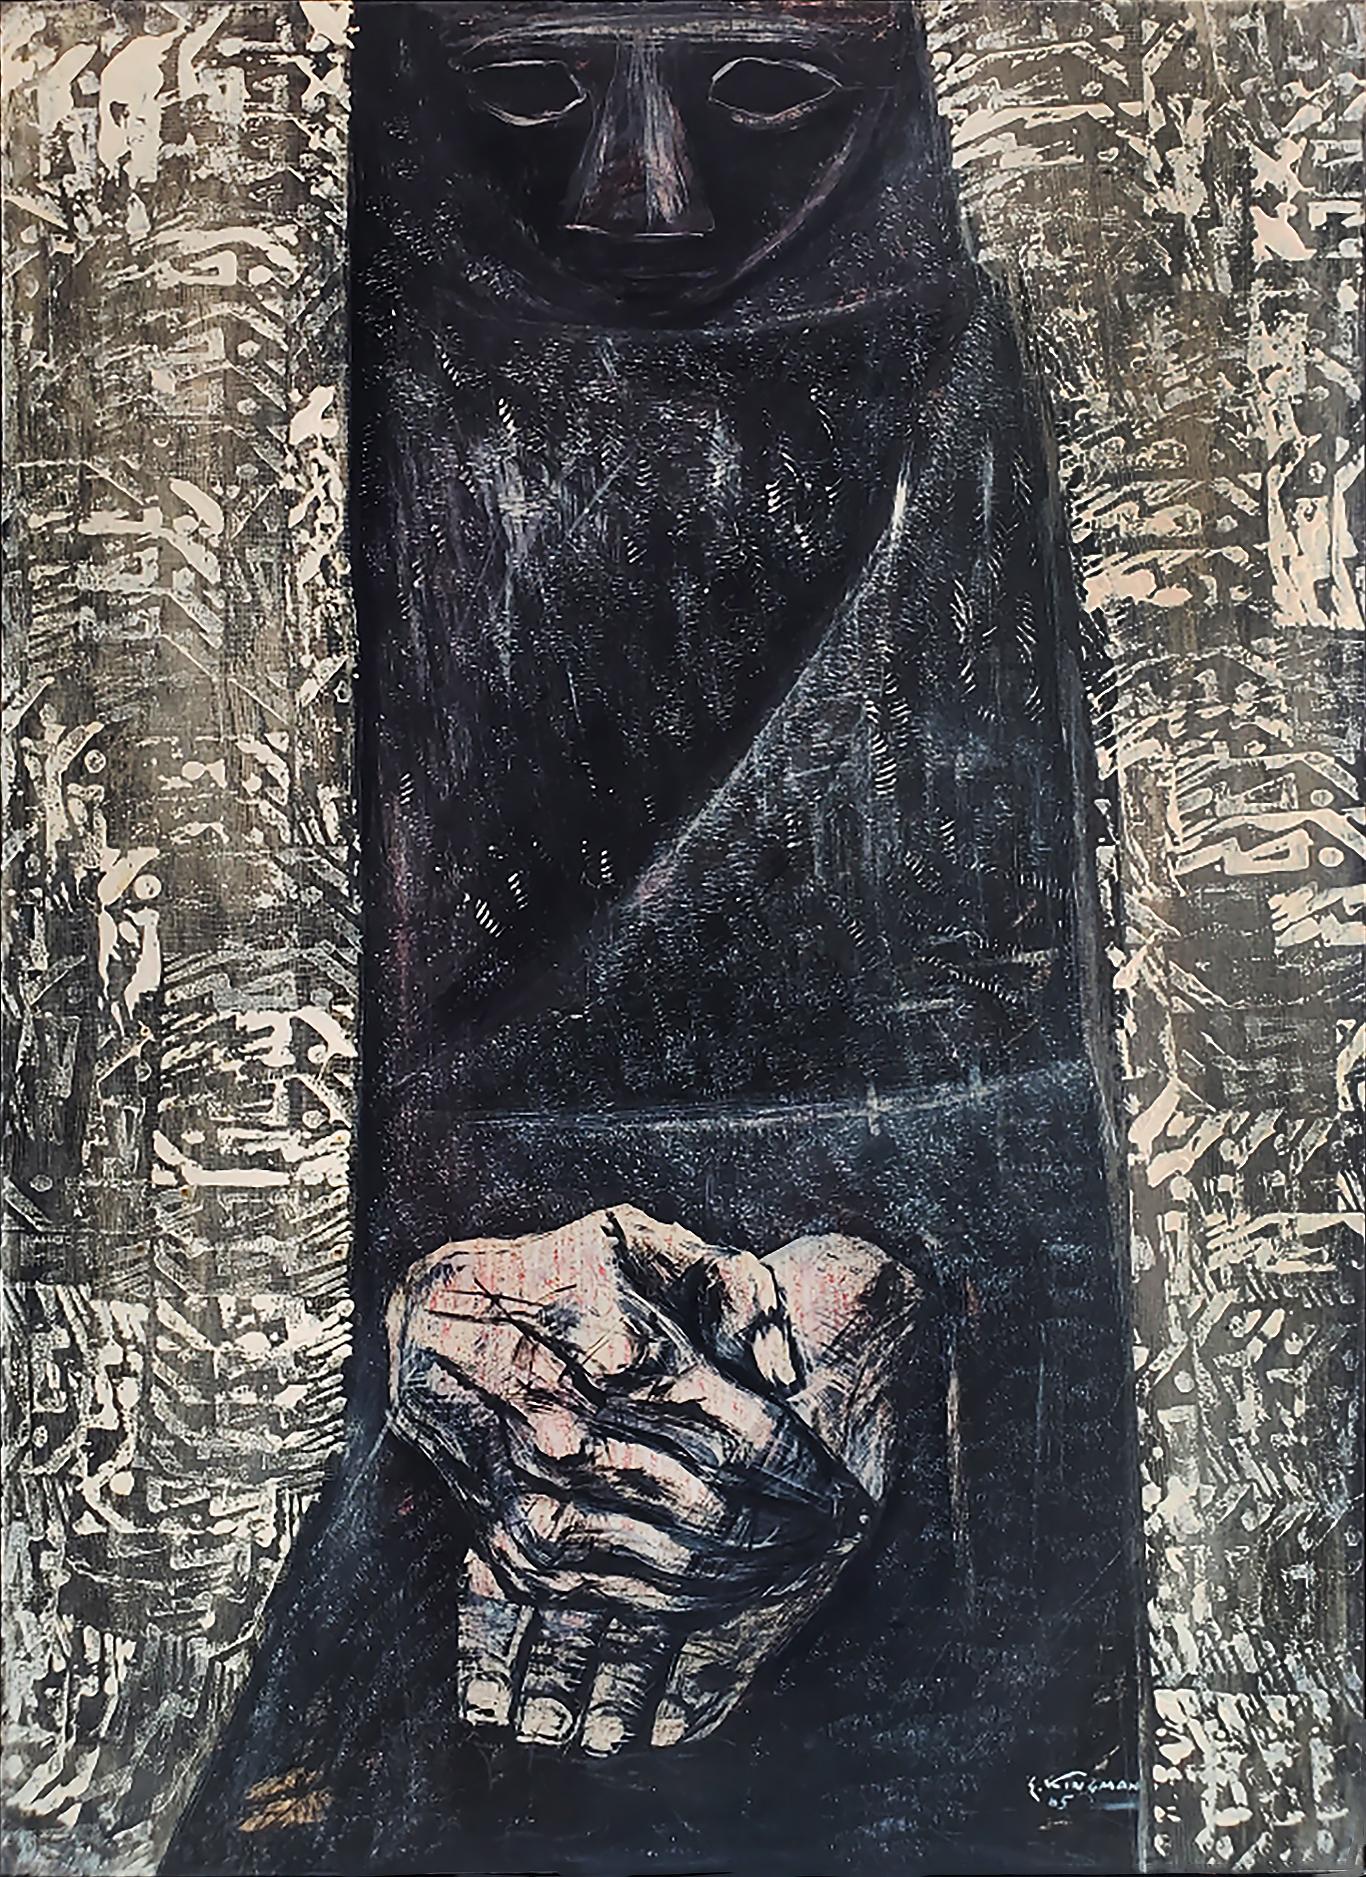 Eduardo Kingman Figurative Painting - Untitled - Mysterious Figure in Black Pancho and Expressive Hands